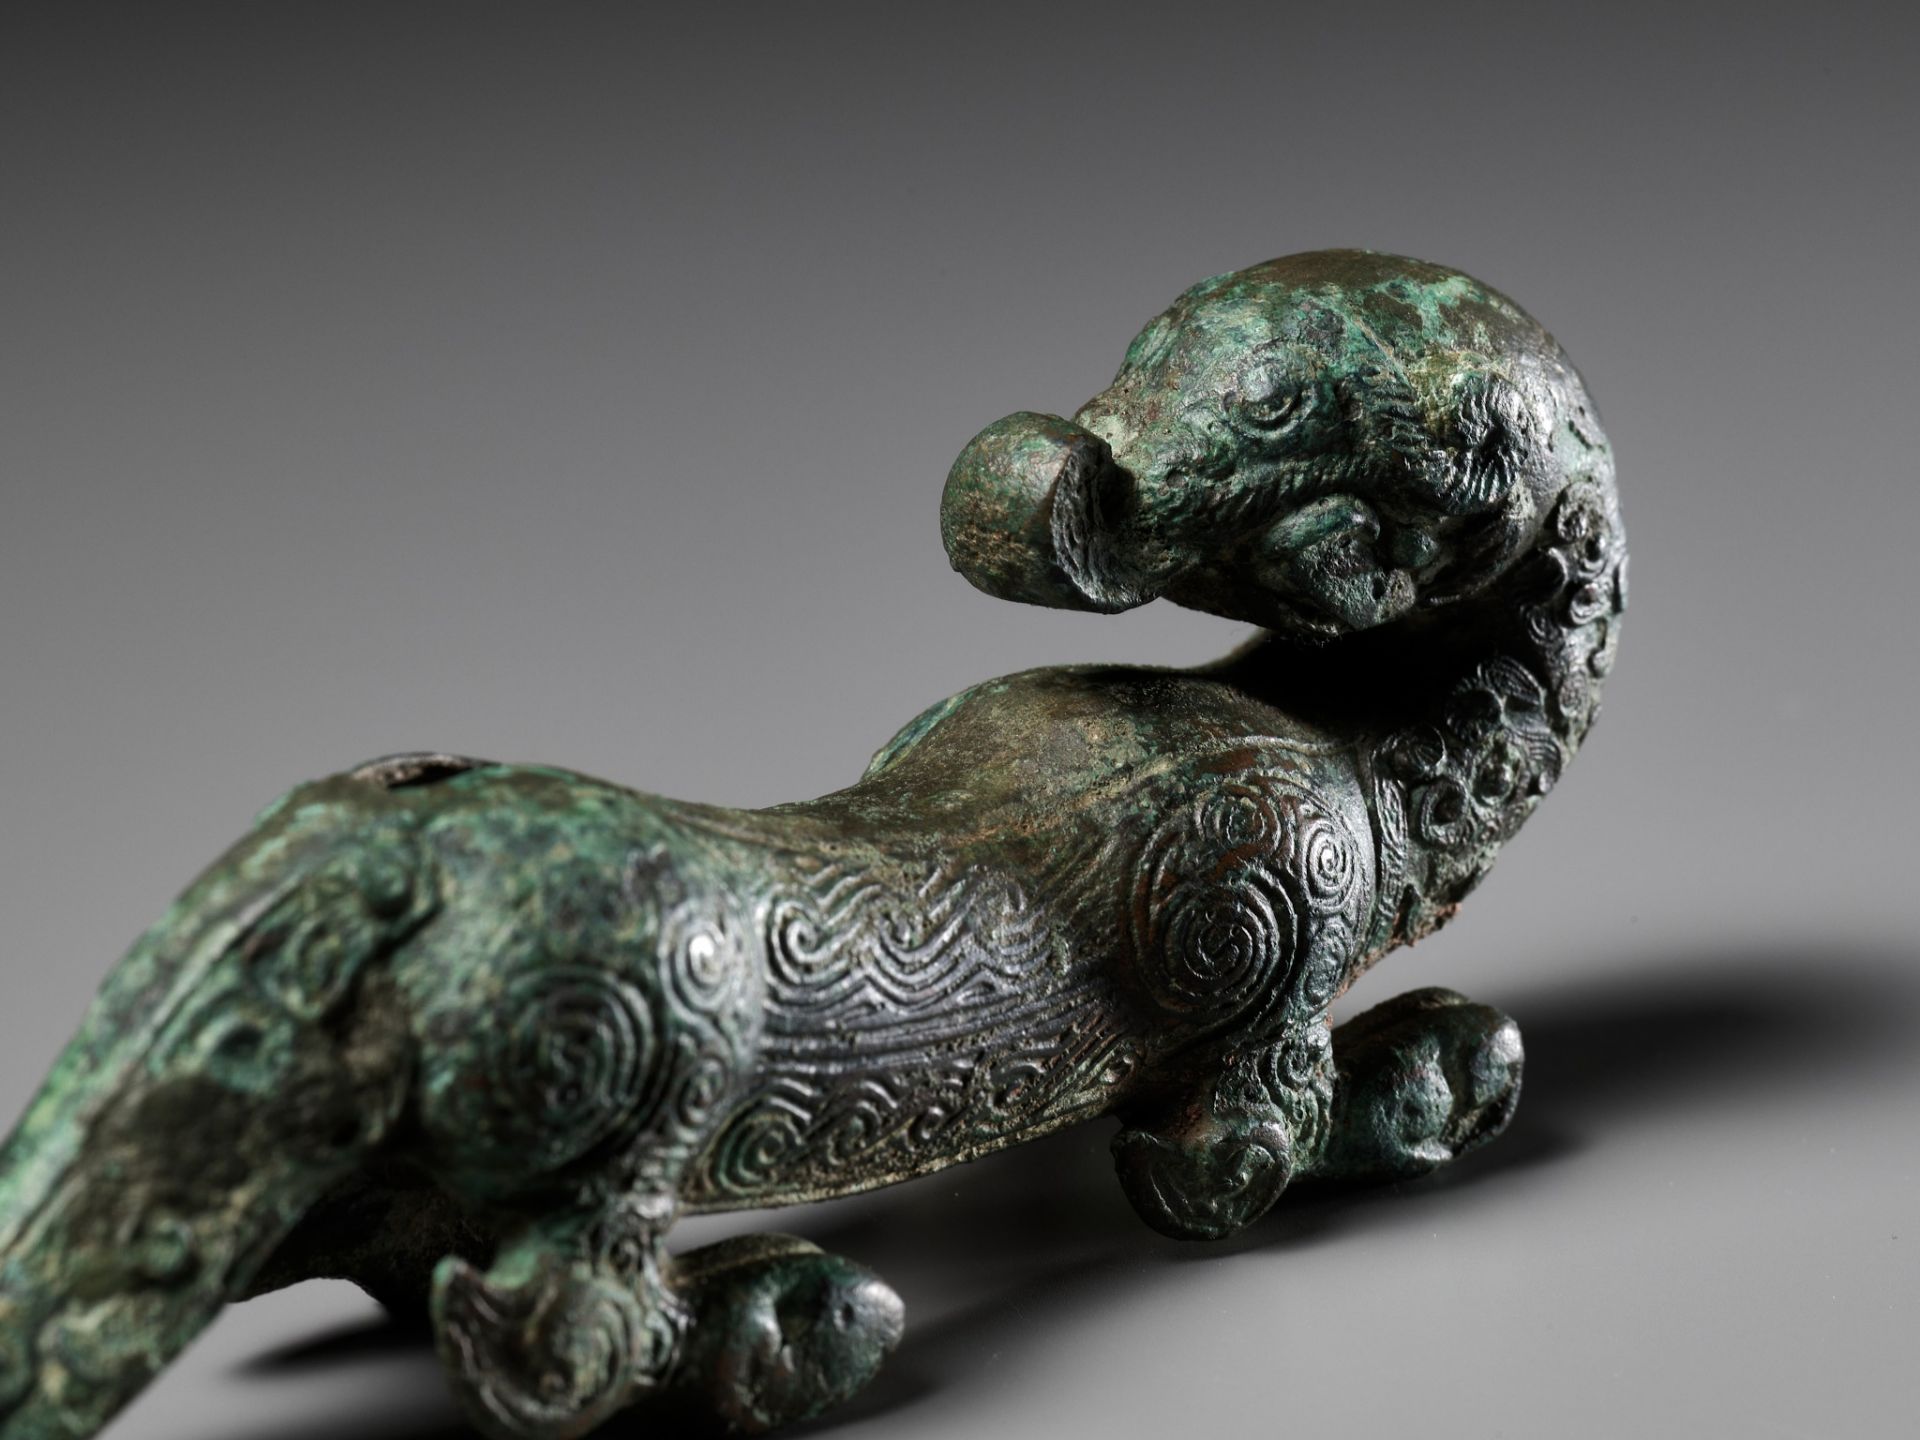 A SUPERB BRONZE FIGURE OF A DRAGON, EASTERN ZHOU DYNASTY, CHINA, 770-256 BC - Image 21 of 23